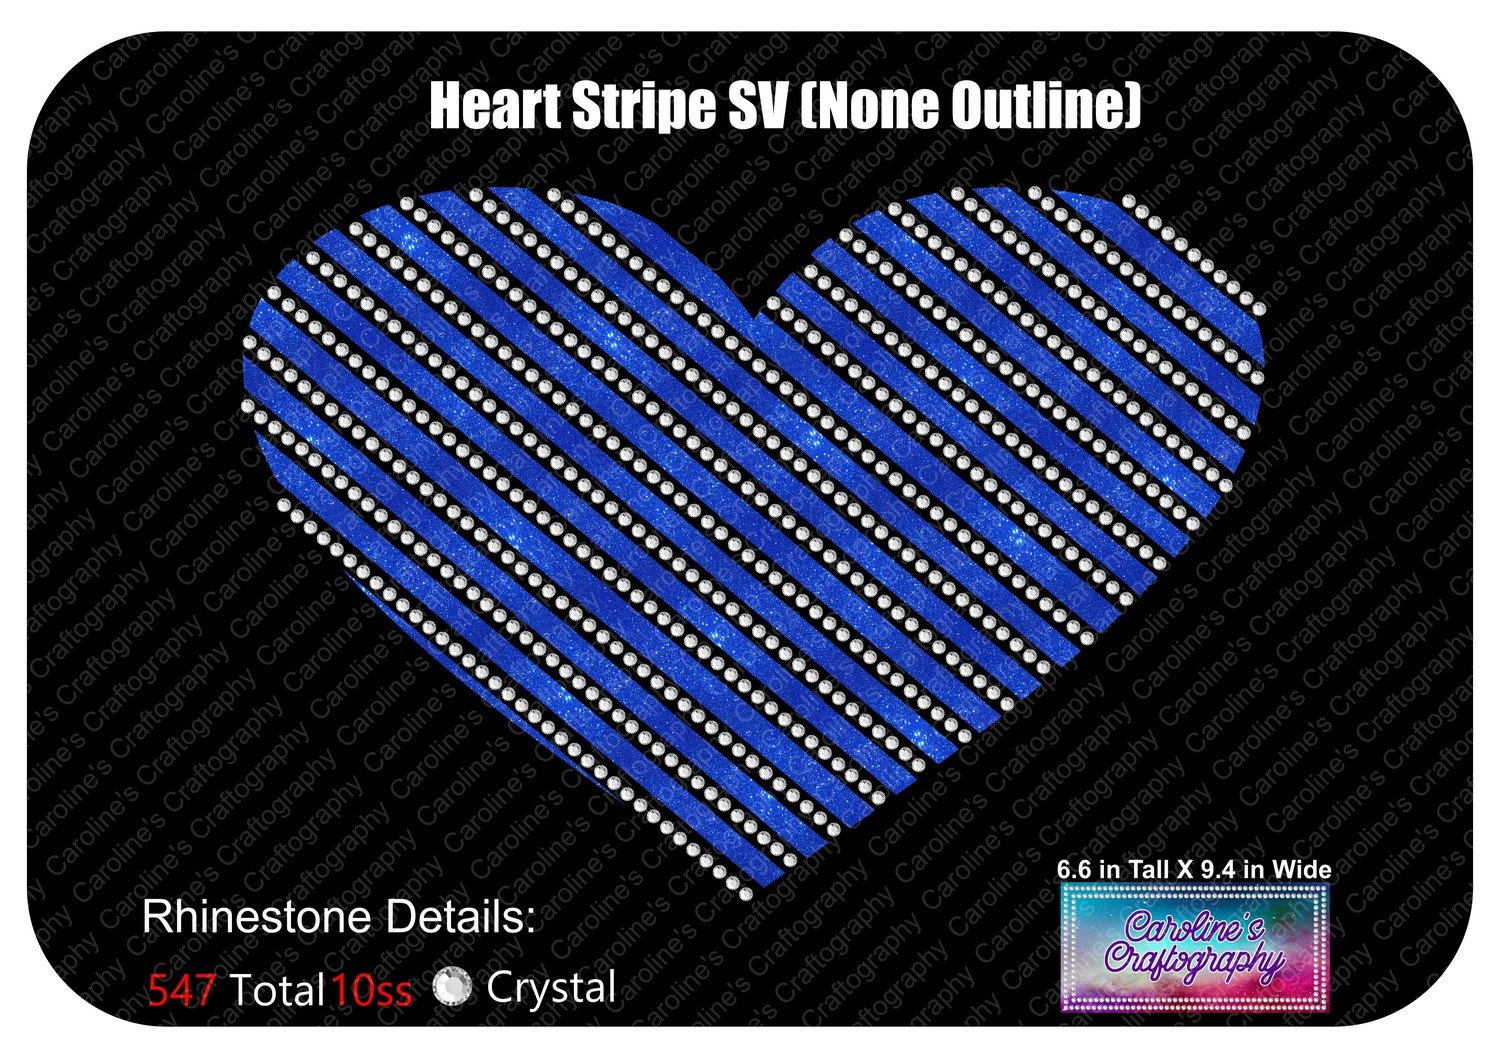 Heart Striped Stone Vinyl (None Outlined)